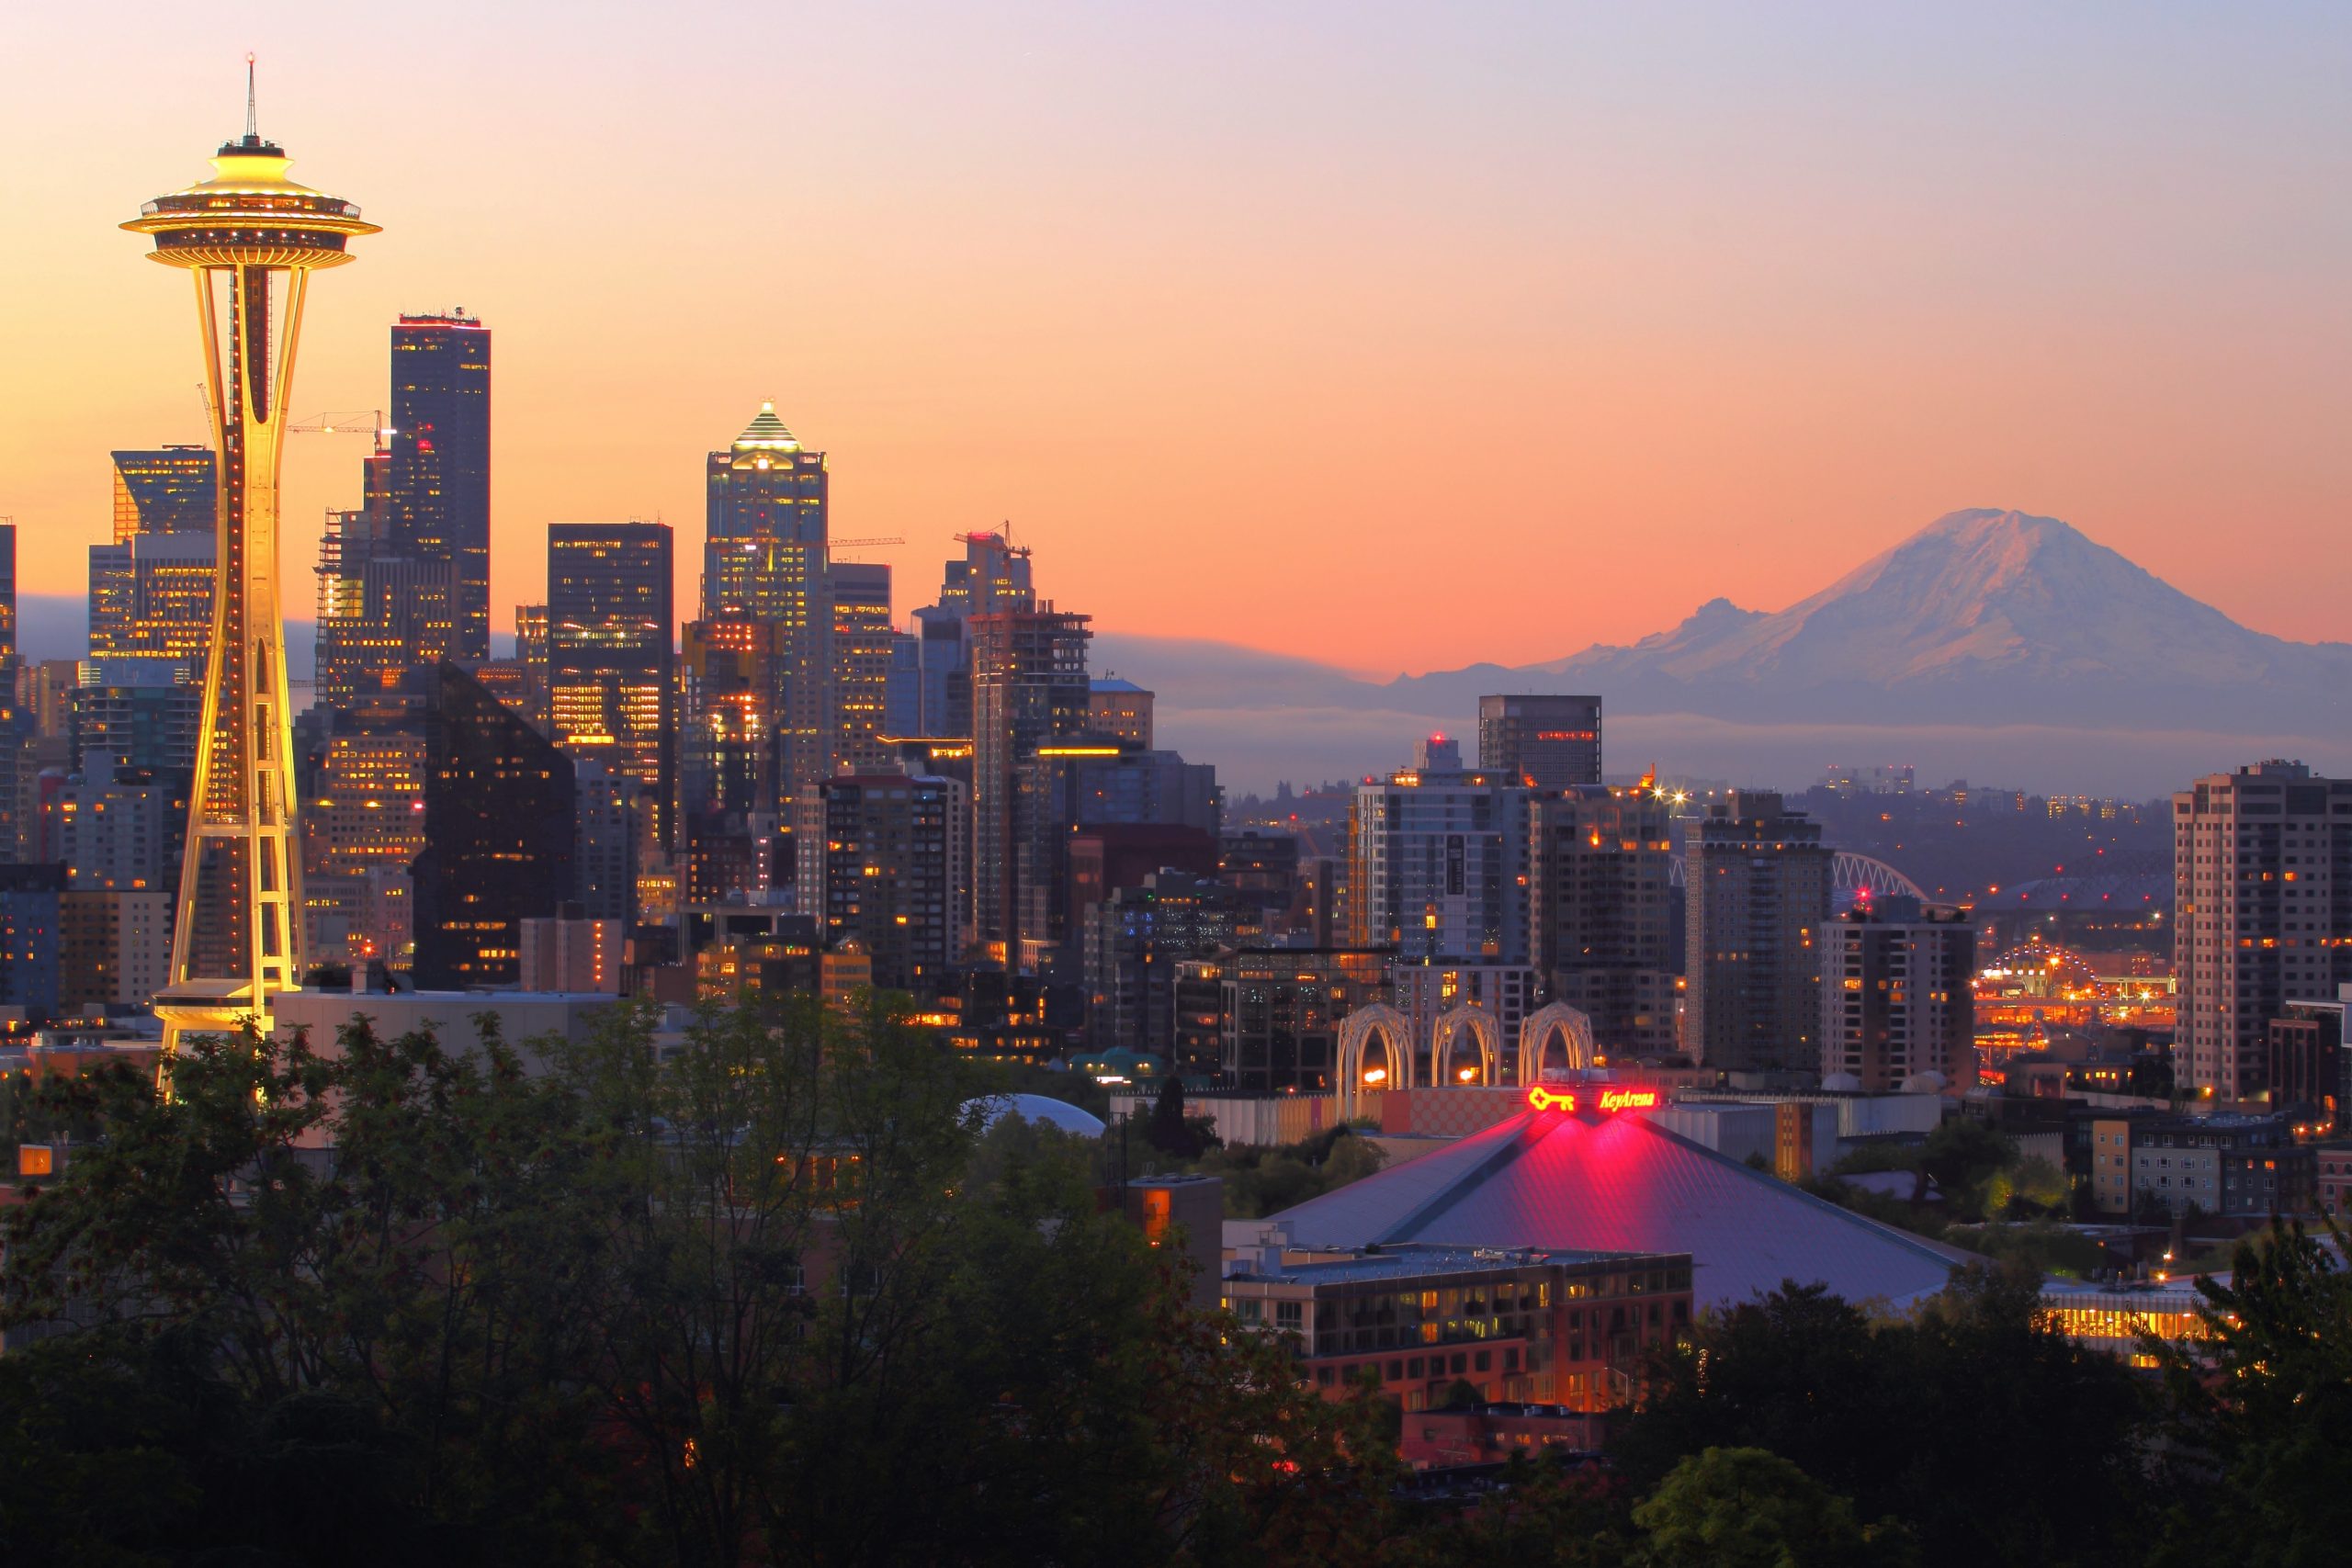 Where to stay in Seattle - the city scape at twilight with the famous needle